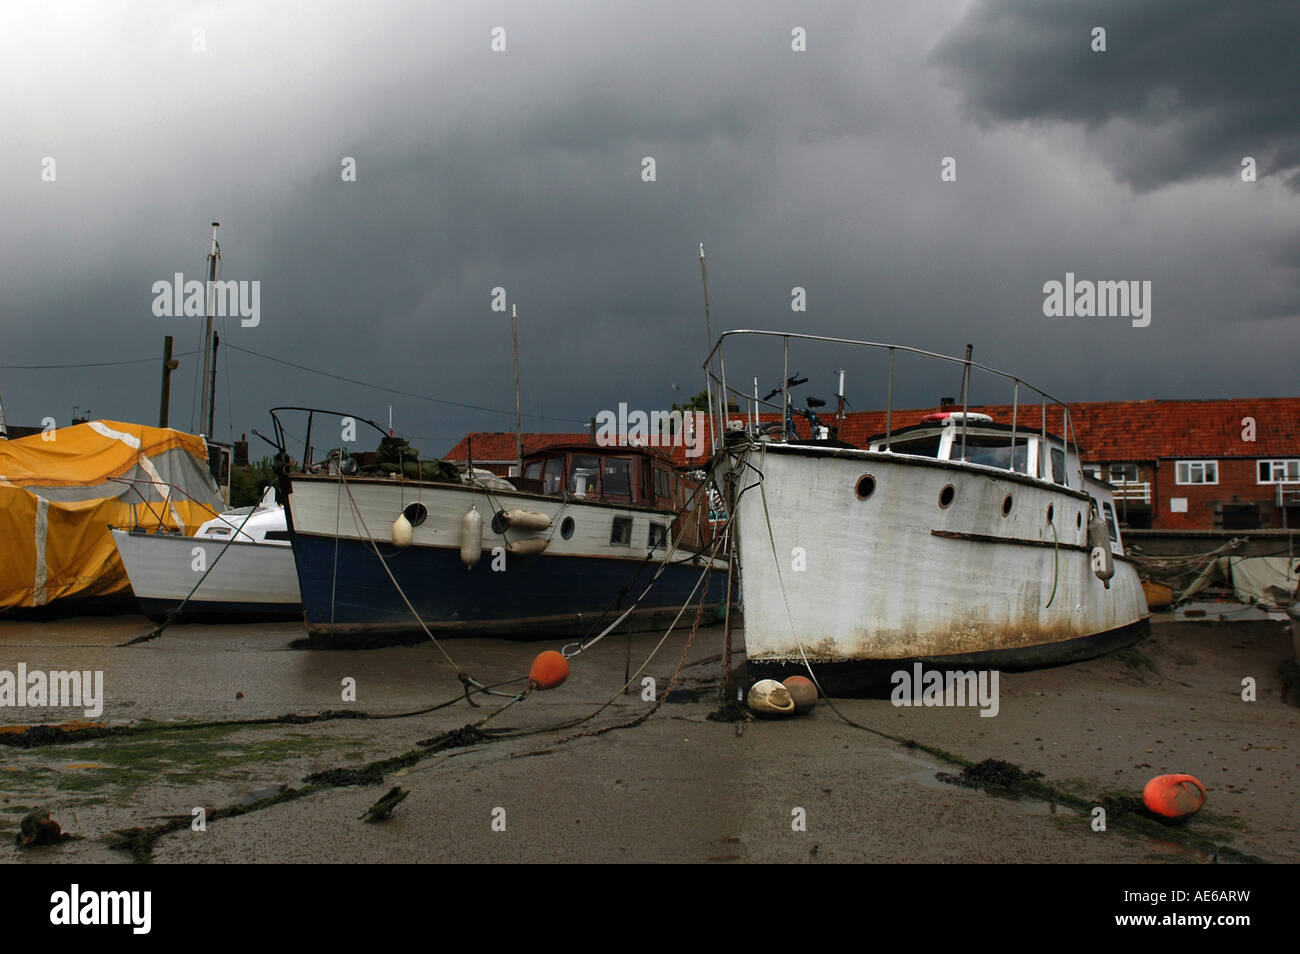 Boats stuck in mud on a low tide Stock Photo